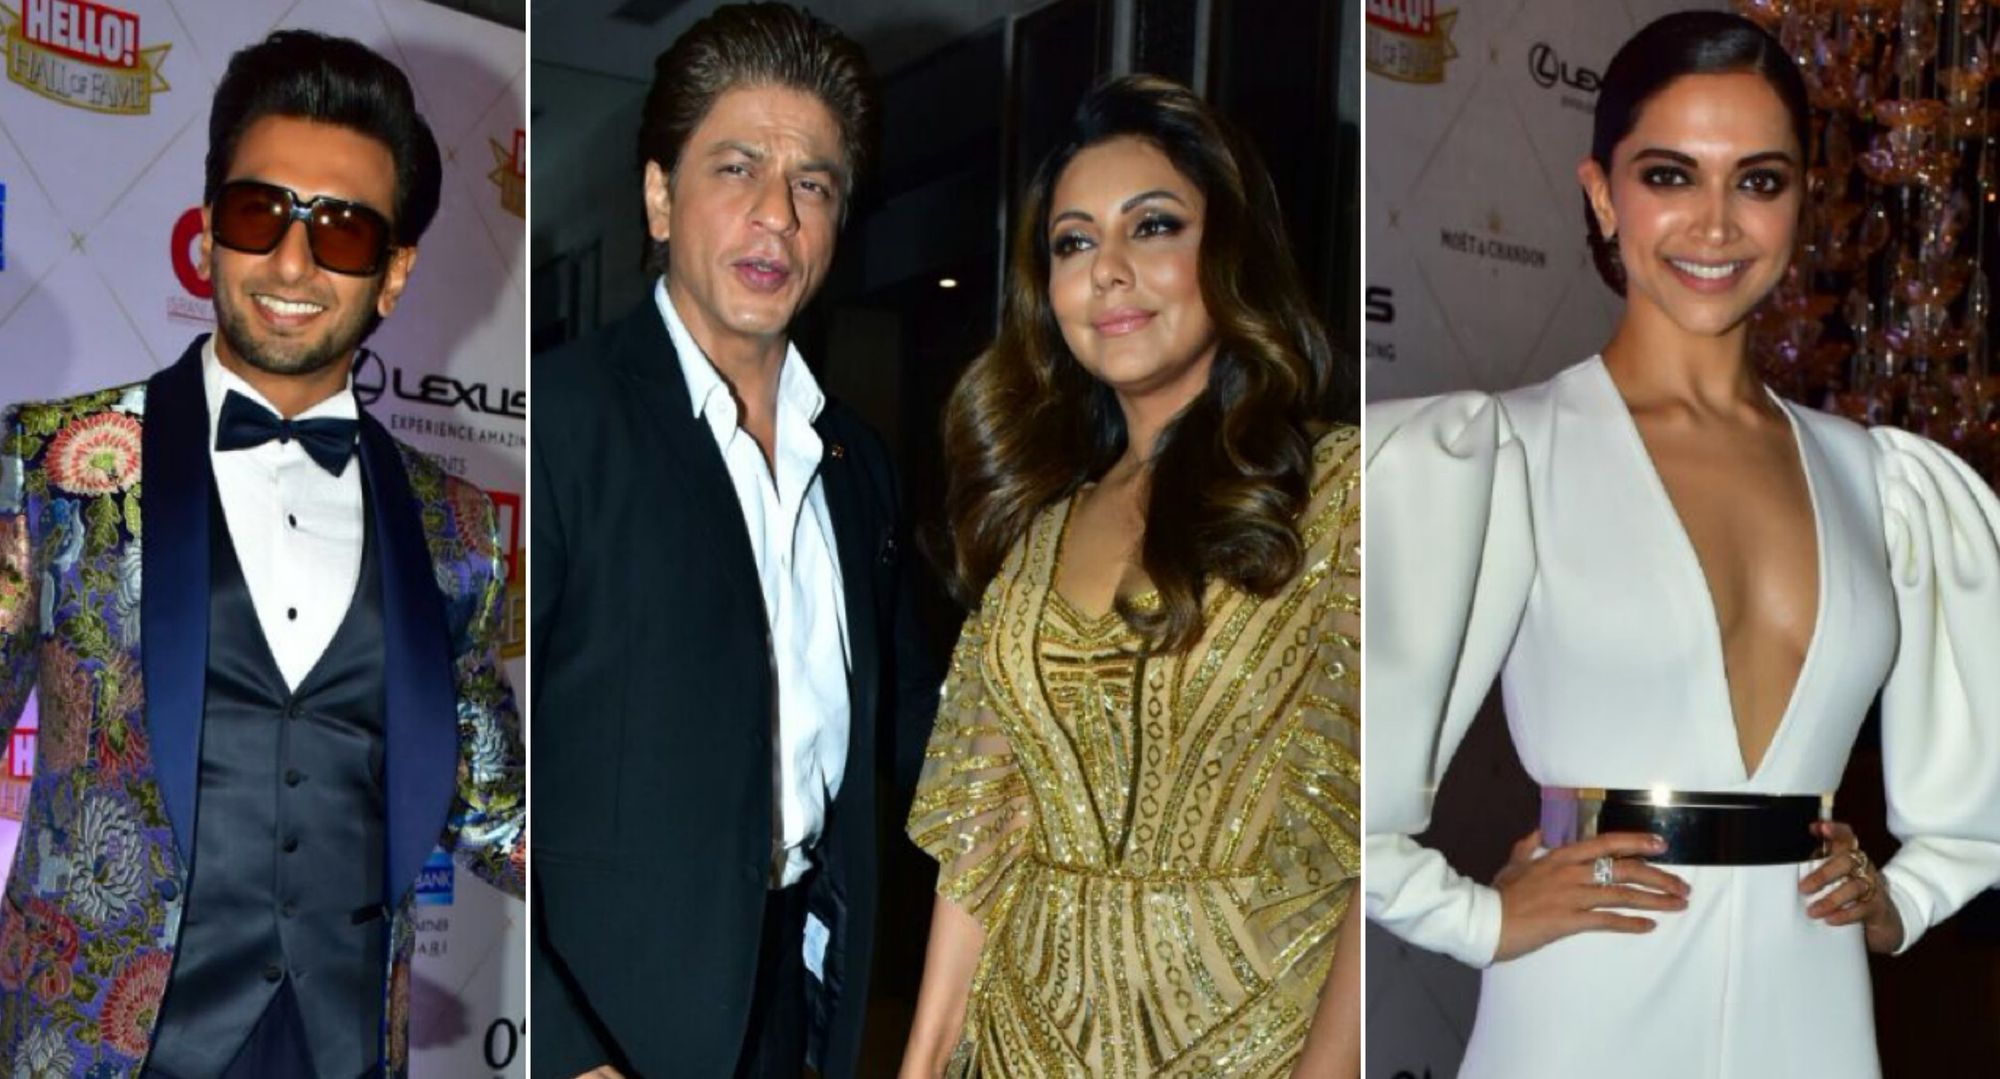 Photo Diary: Ranveer Singh, Deepika Padukone, Shah Rukh Khan & Others At The Hello Hall Of Fame Awards